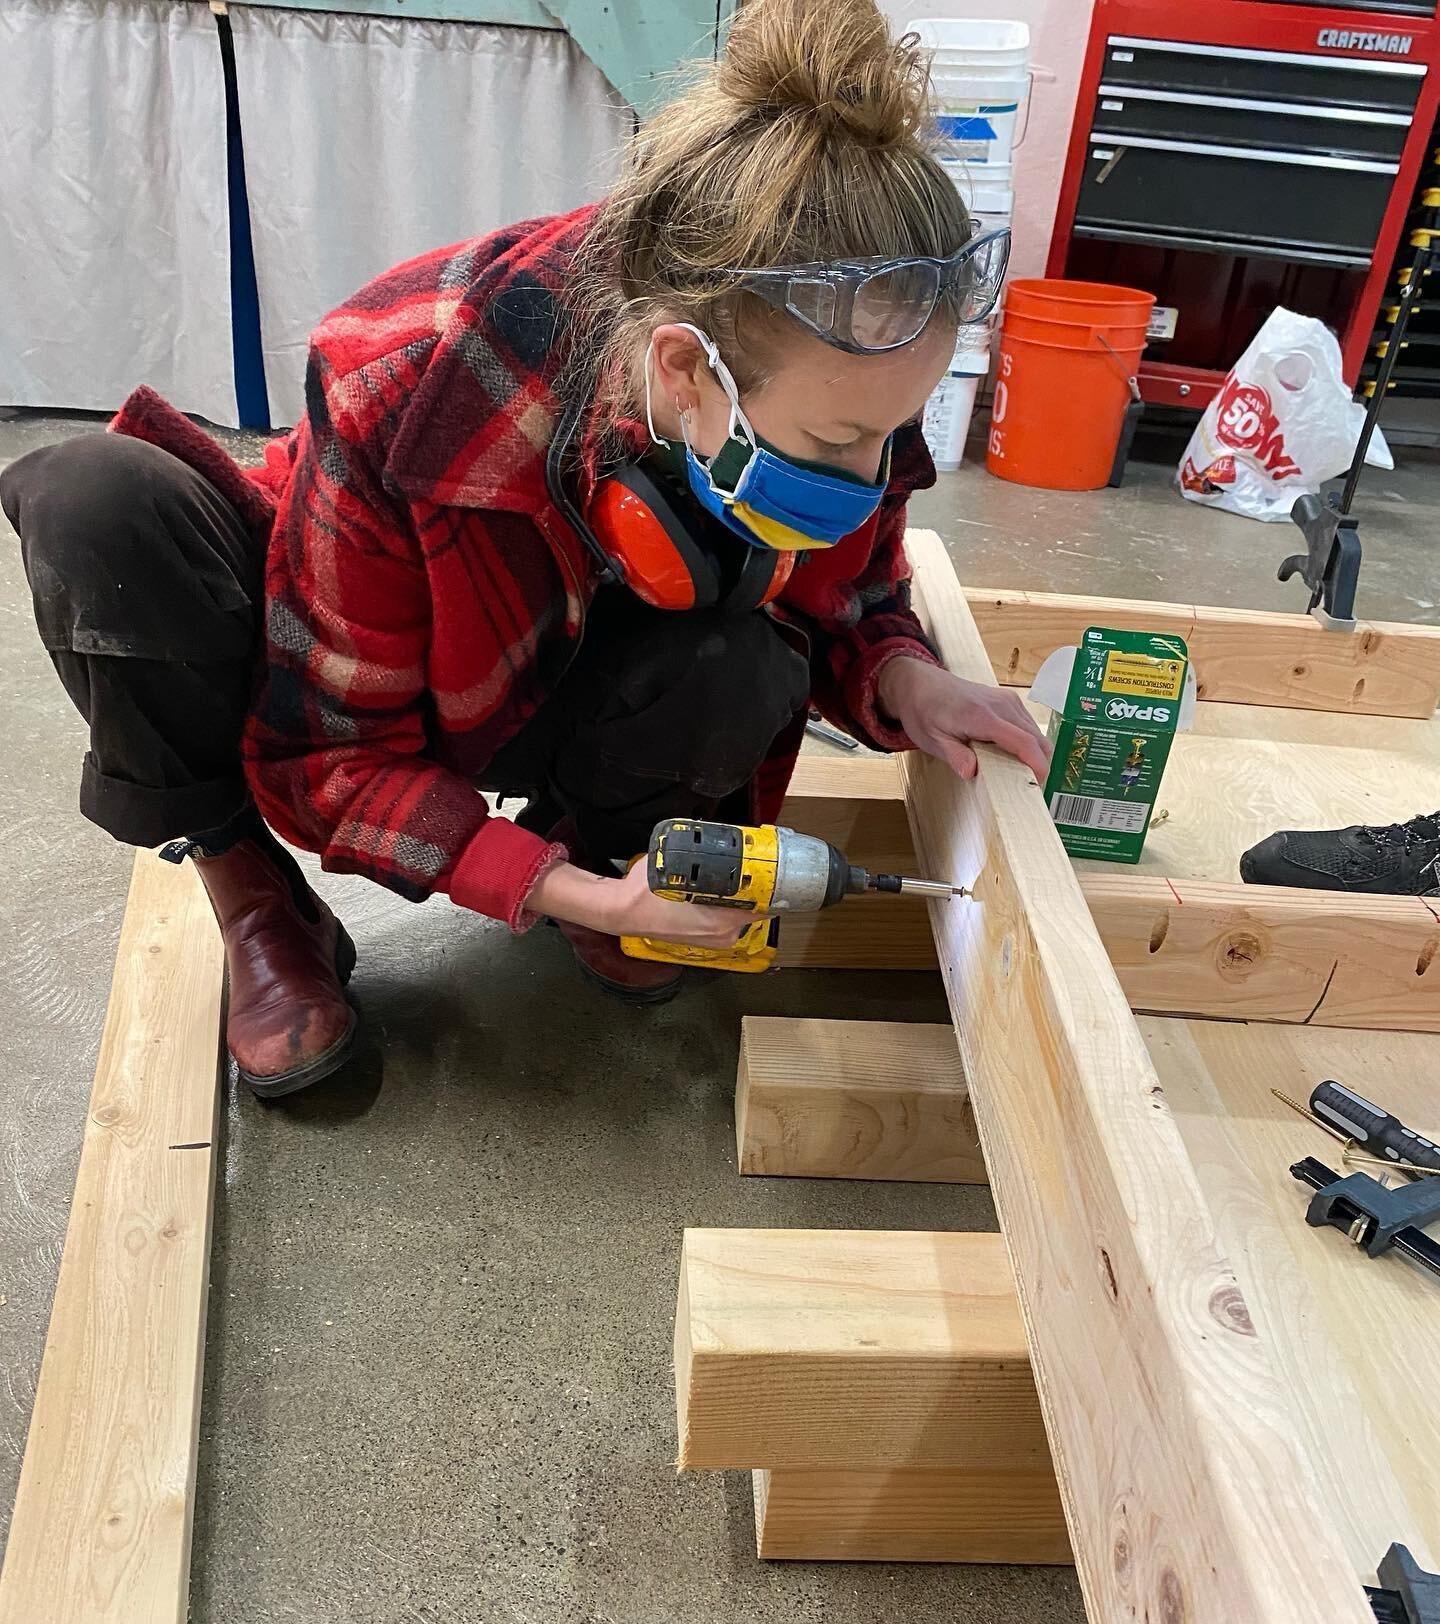 Lots of fun helping out @seattlemakershq build some woodshop tables. 
.
.
#womenwhobuild #woodworking #mitersaw #makersofinstagram #challengeaccepted #ididntpuke